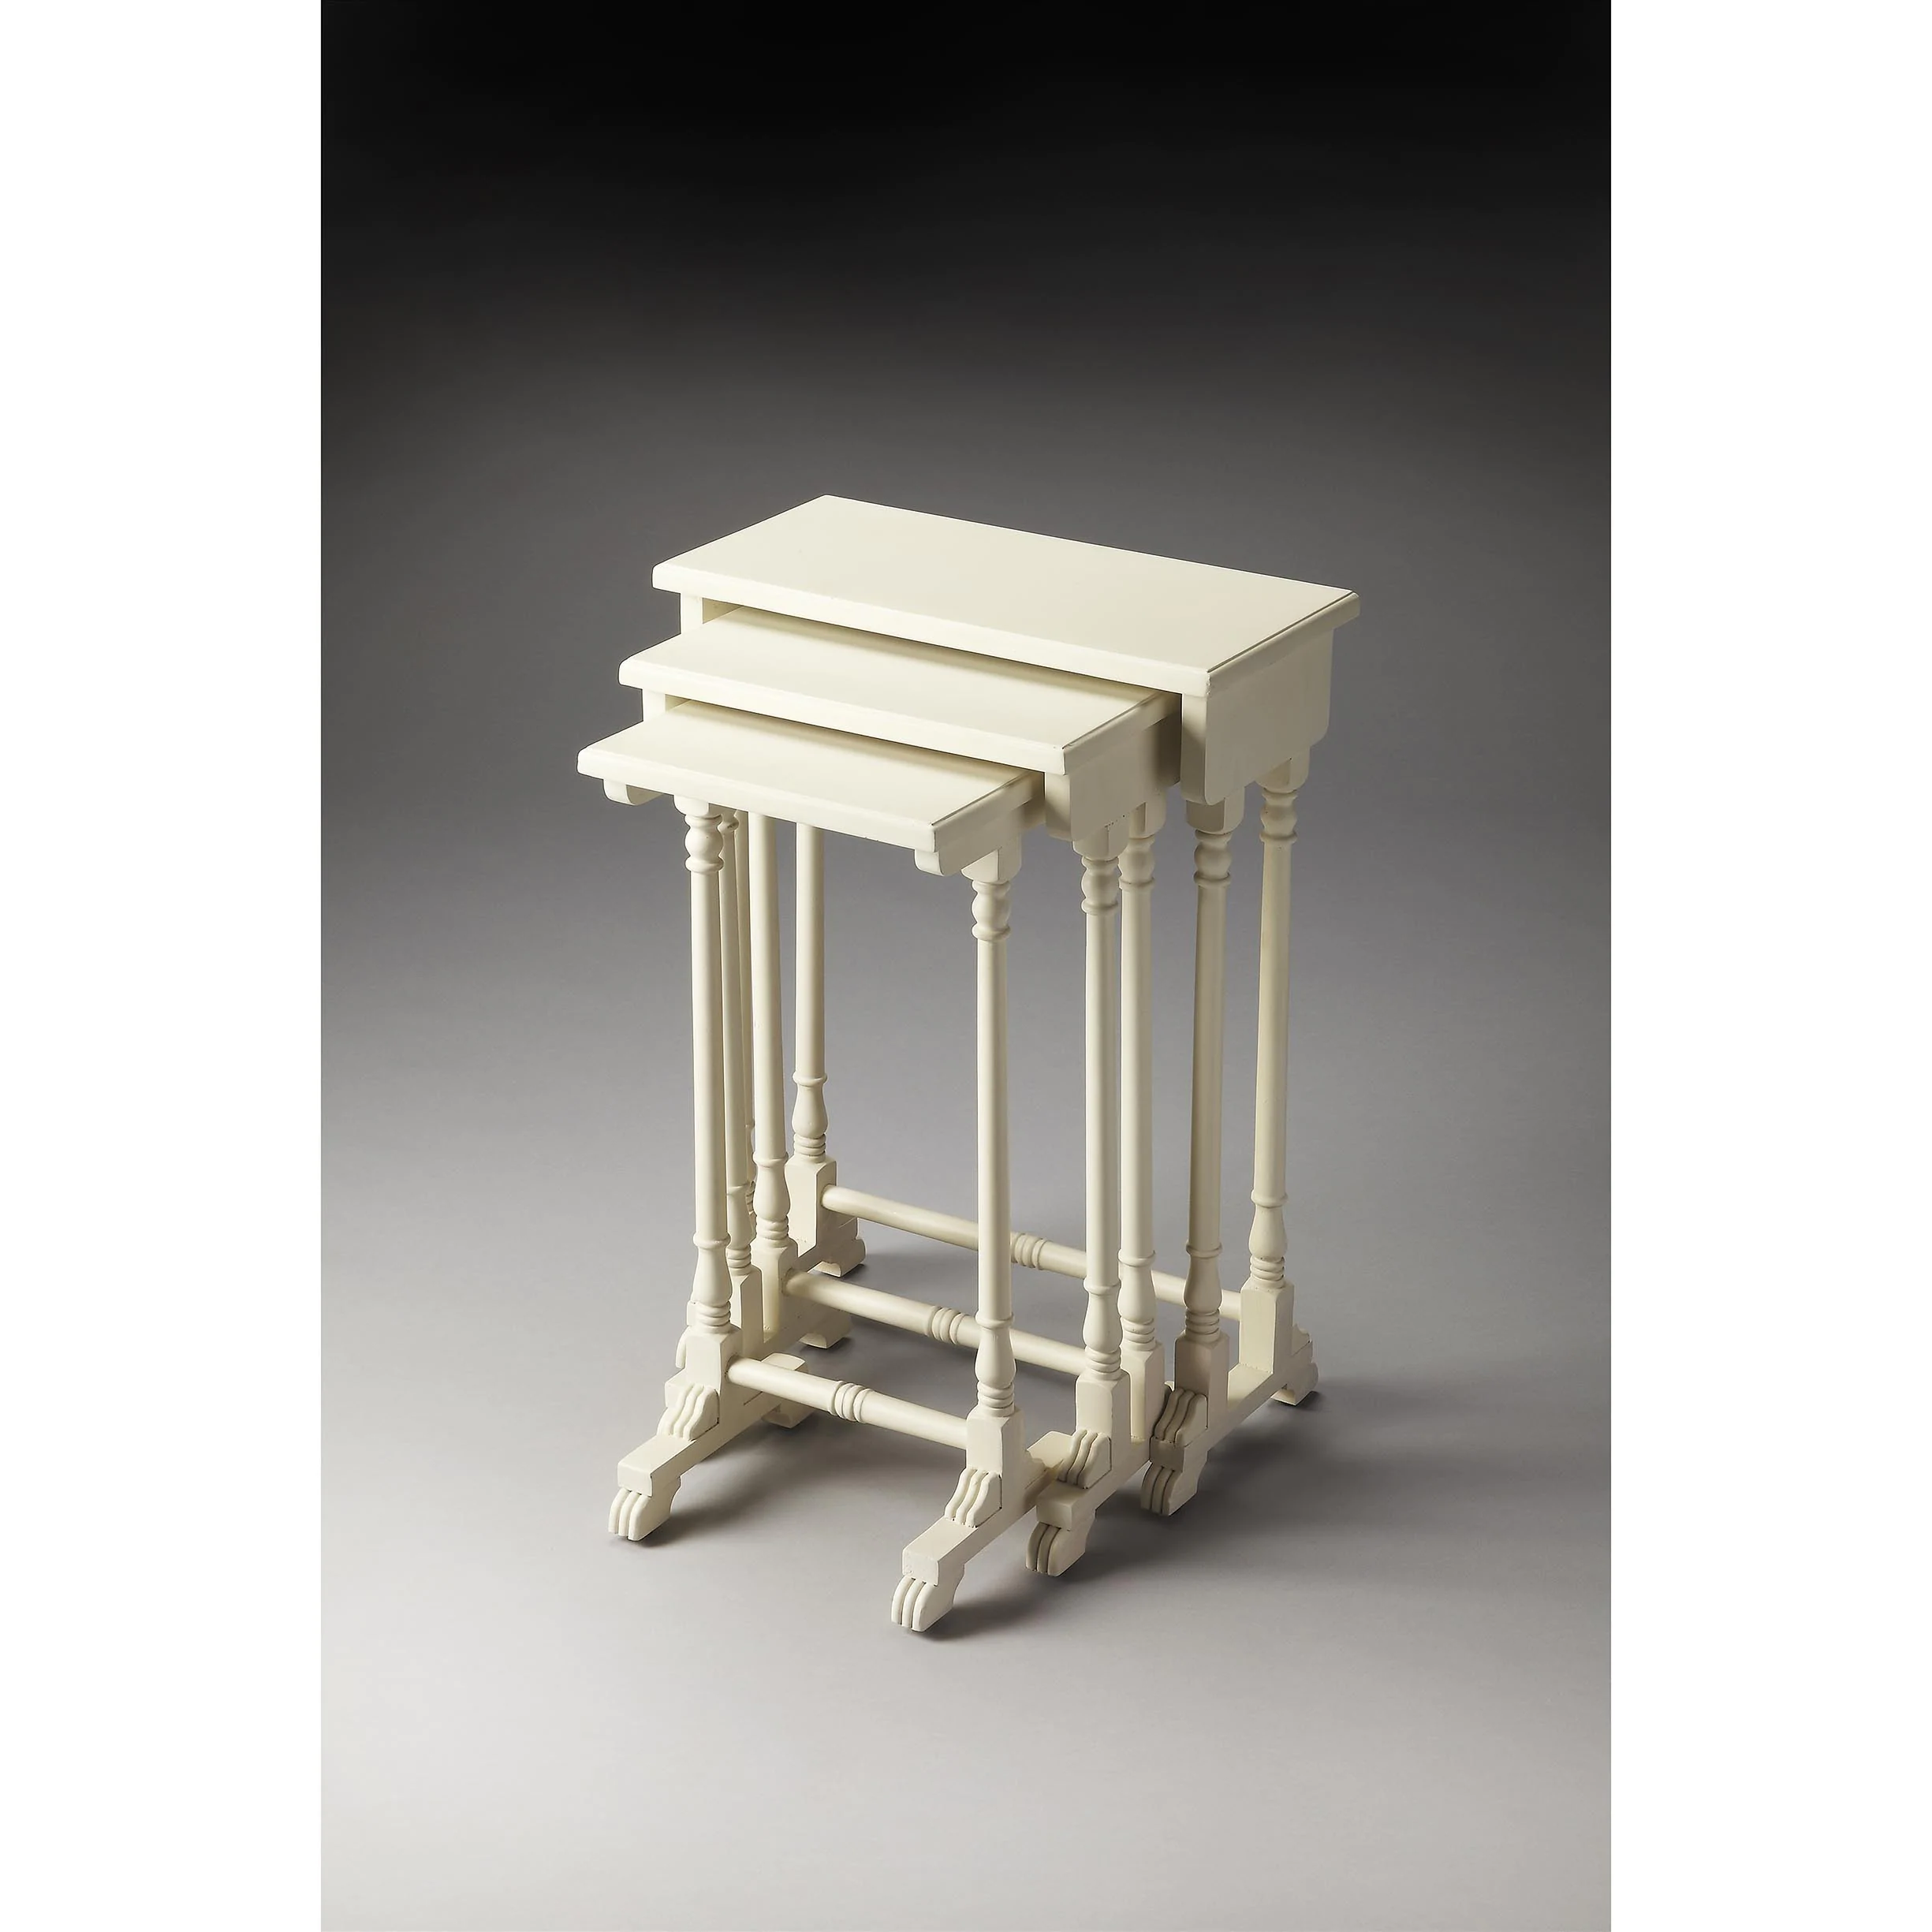 handmade butler dunham cottage white nesting tables nolan pedestal accent table free shipping today square bedside lamps antique coffee home office furniture lucite brass painted